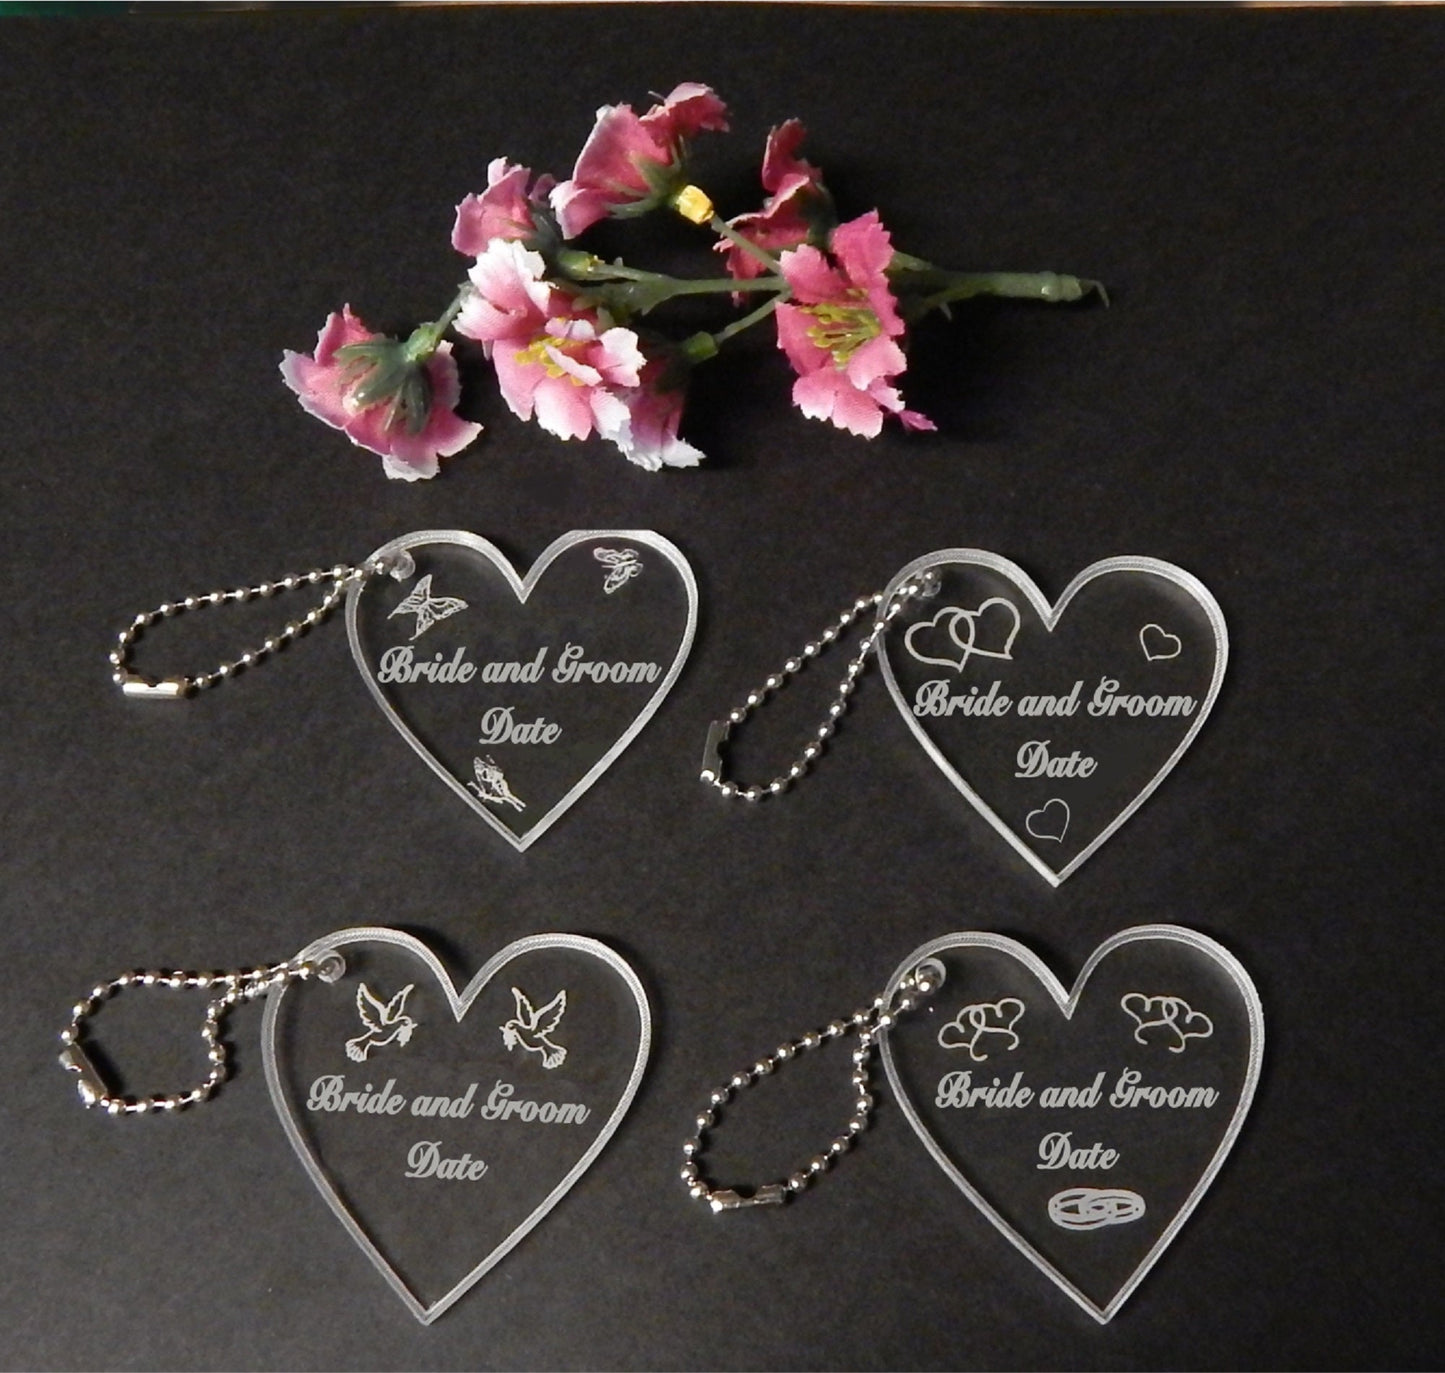 QTY 25 Personalized Heart Key Chain Favors custom engraved acrylic keychains